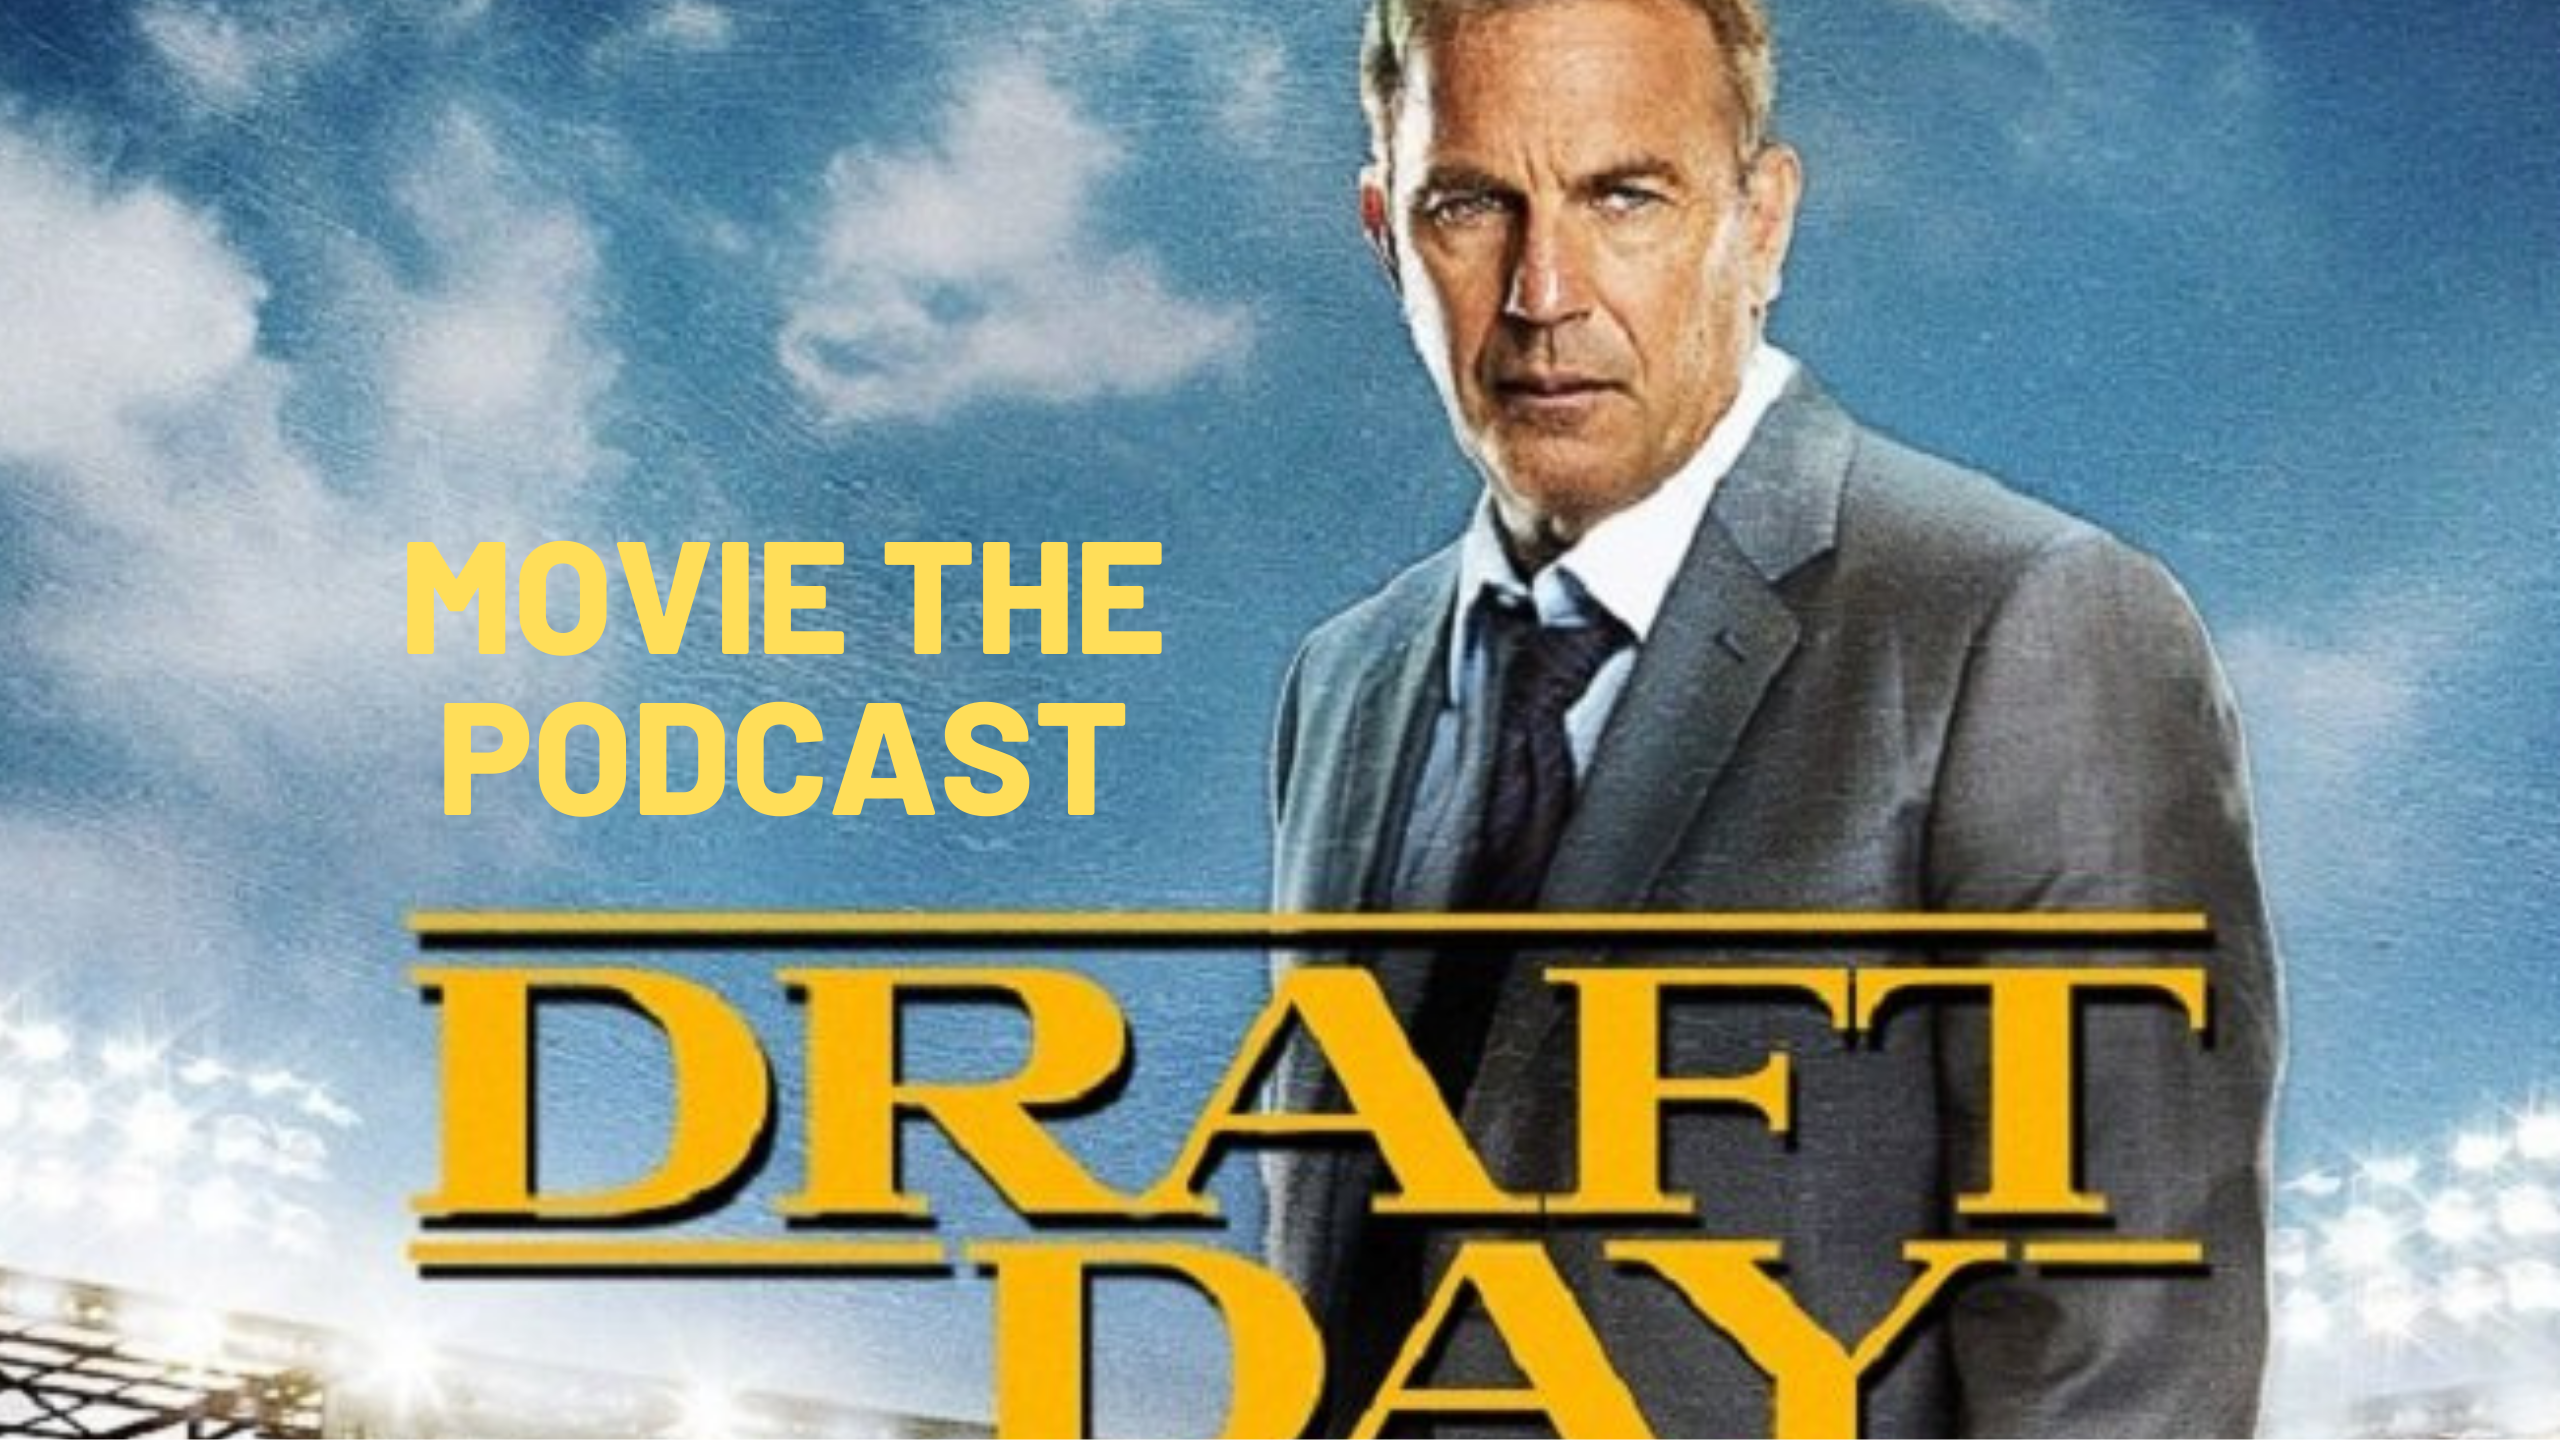 Movie The Podcast : Draft Day